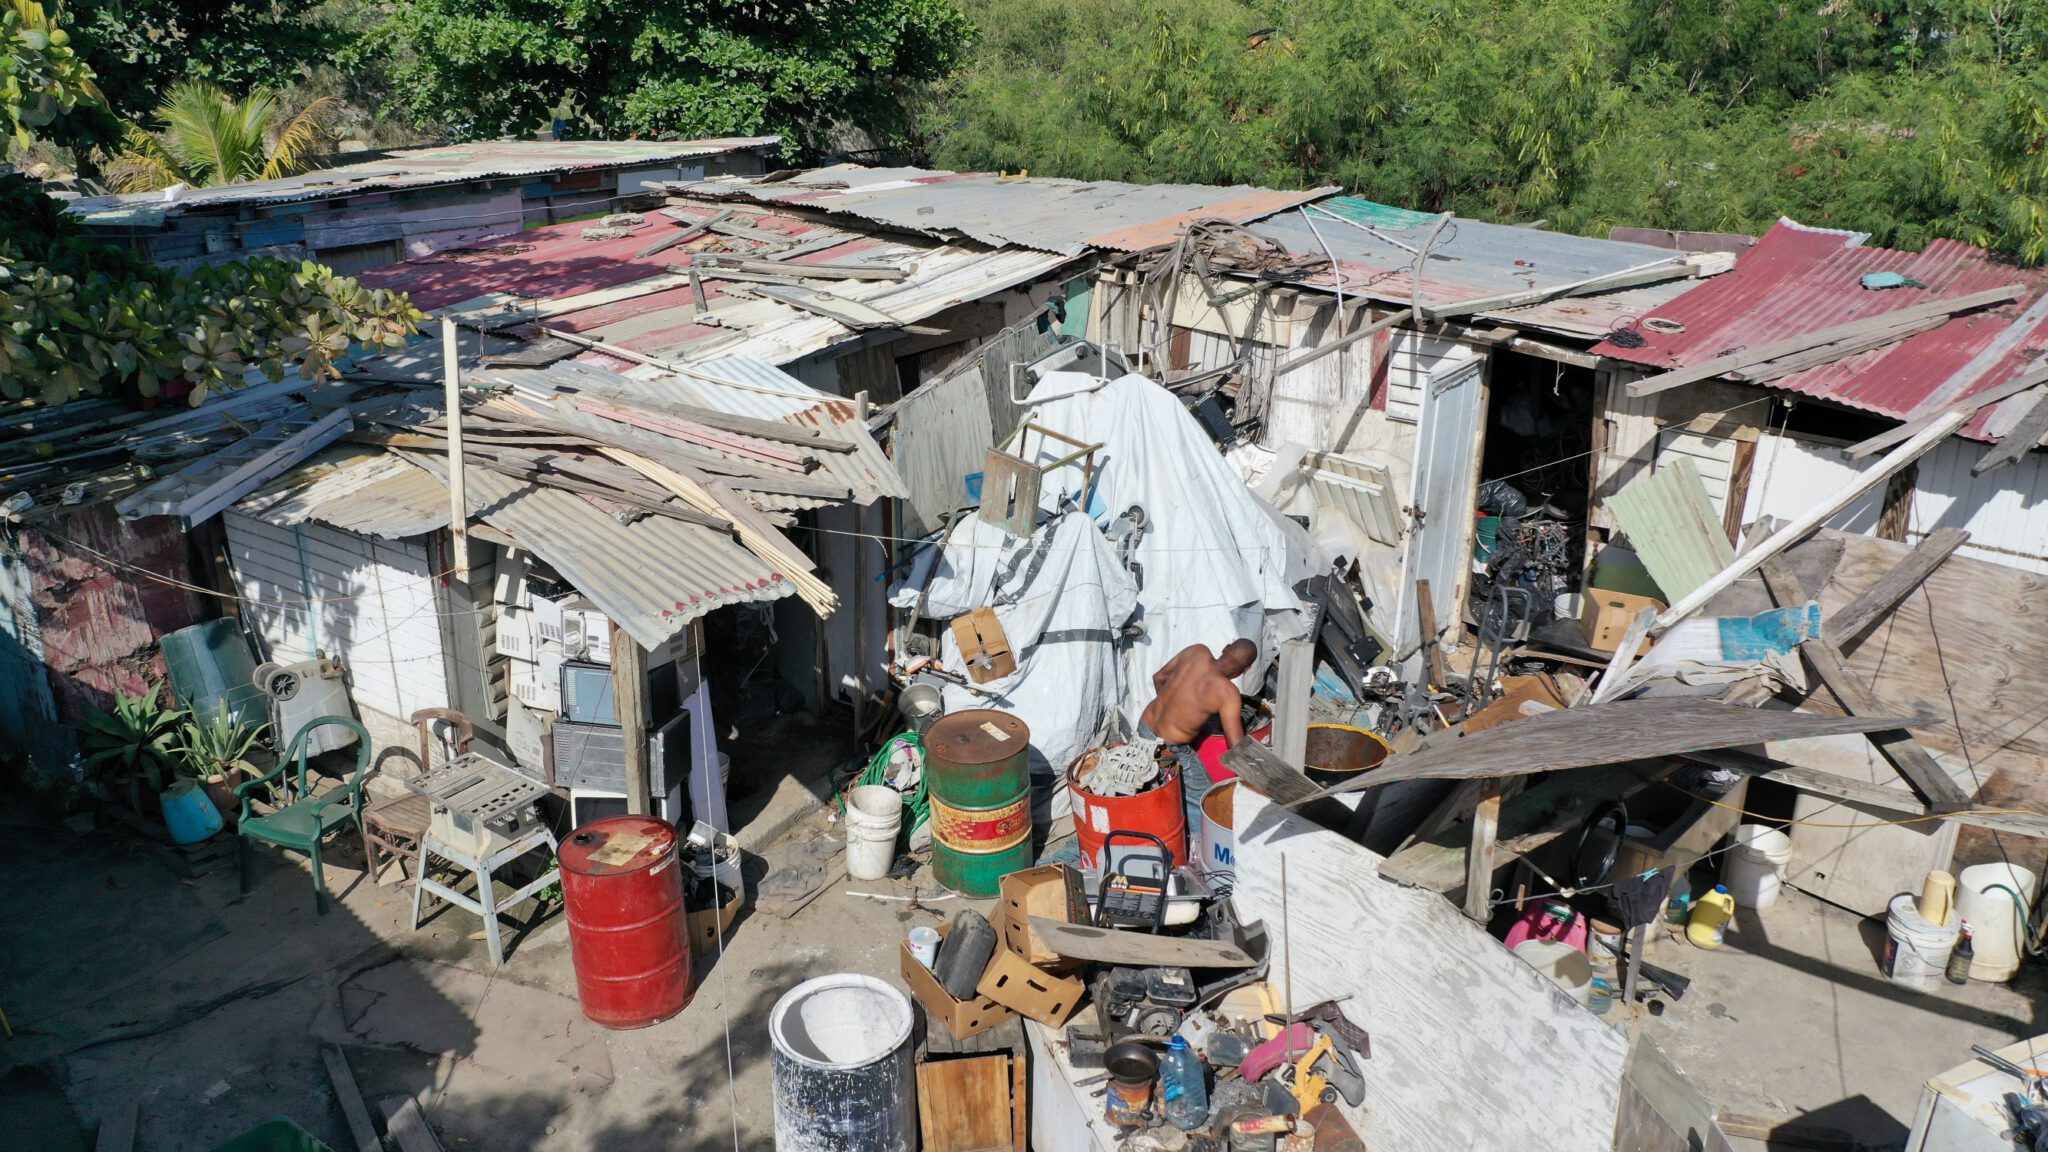 Illegals To Be Forcibly Removed From Squalid Homes On The Edge Of A Sint Maarten Garbage Dump